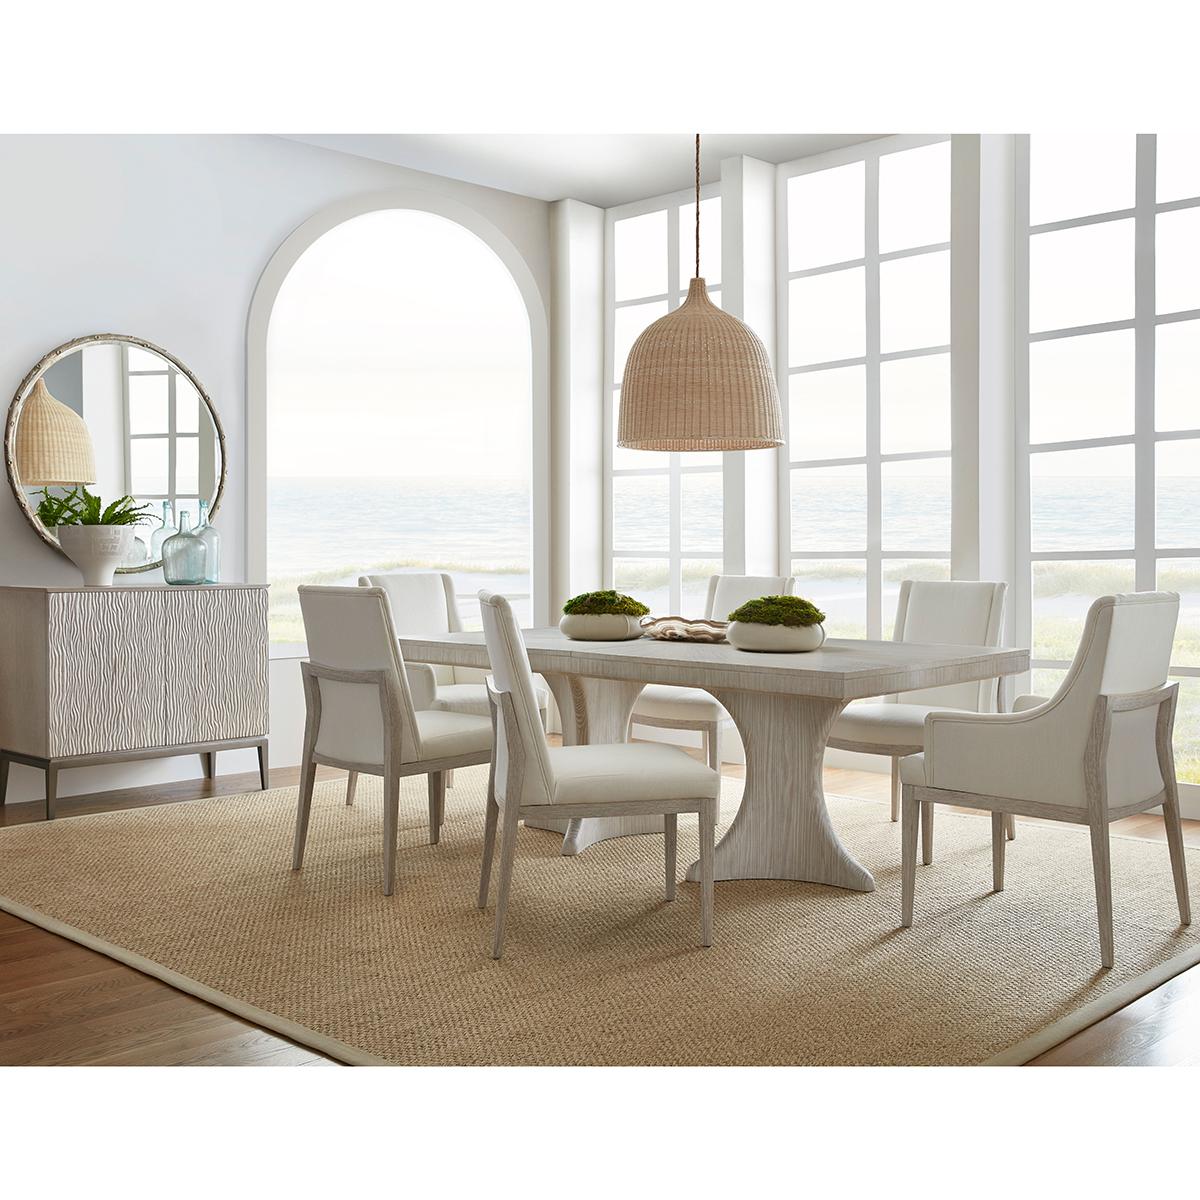 Vietnamese Coastal Breeze Extension Dining Table For Sale